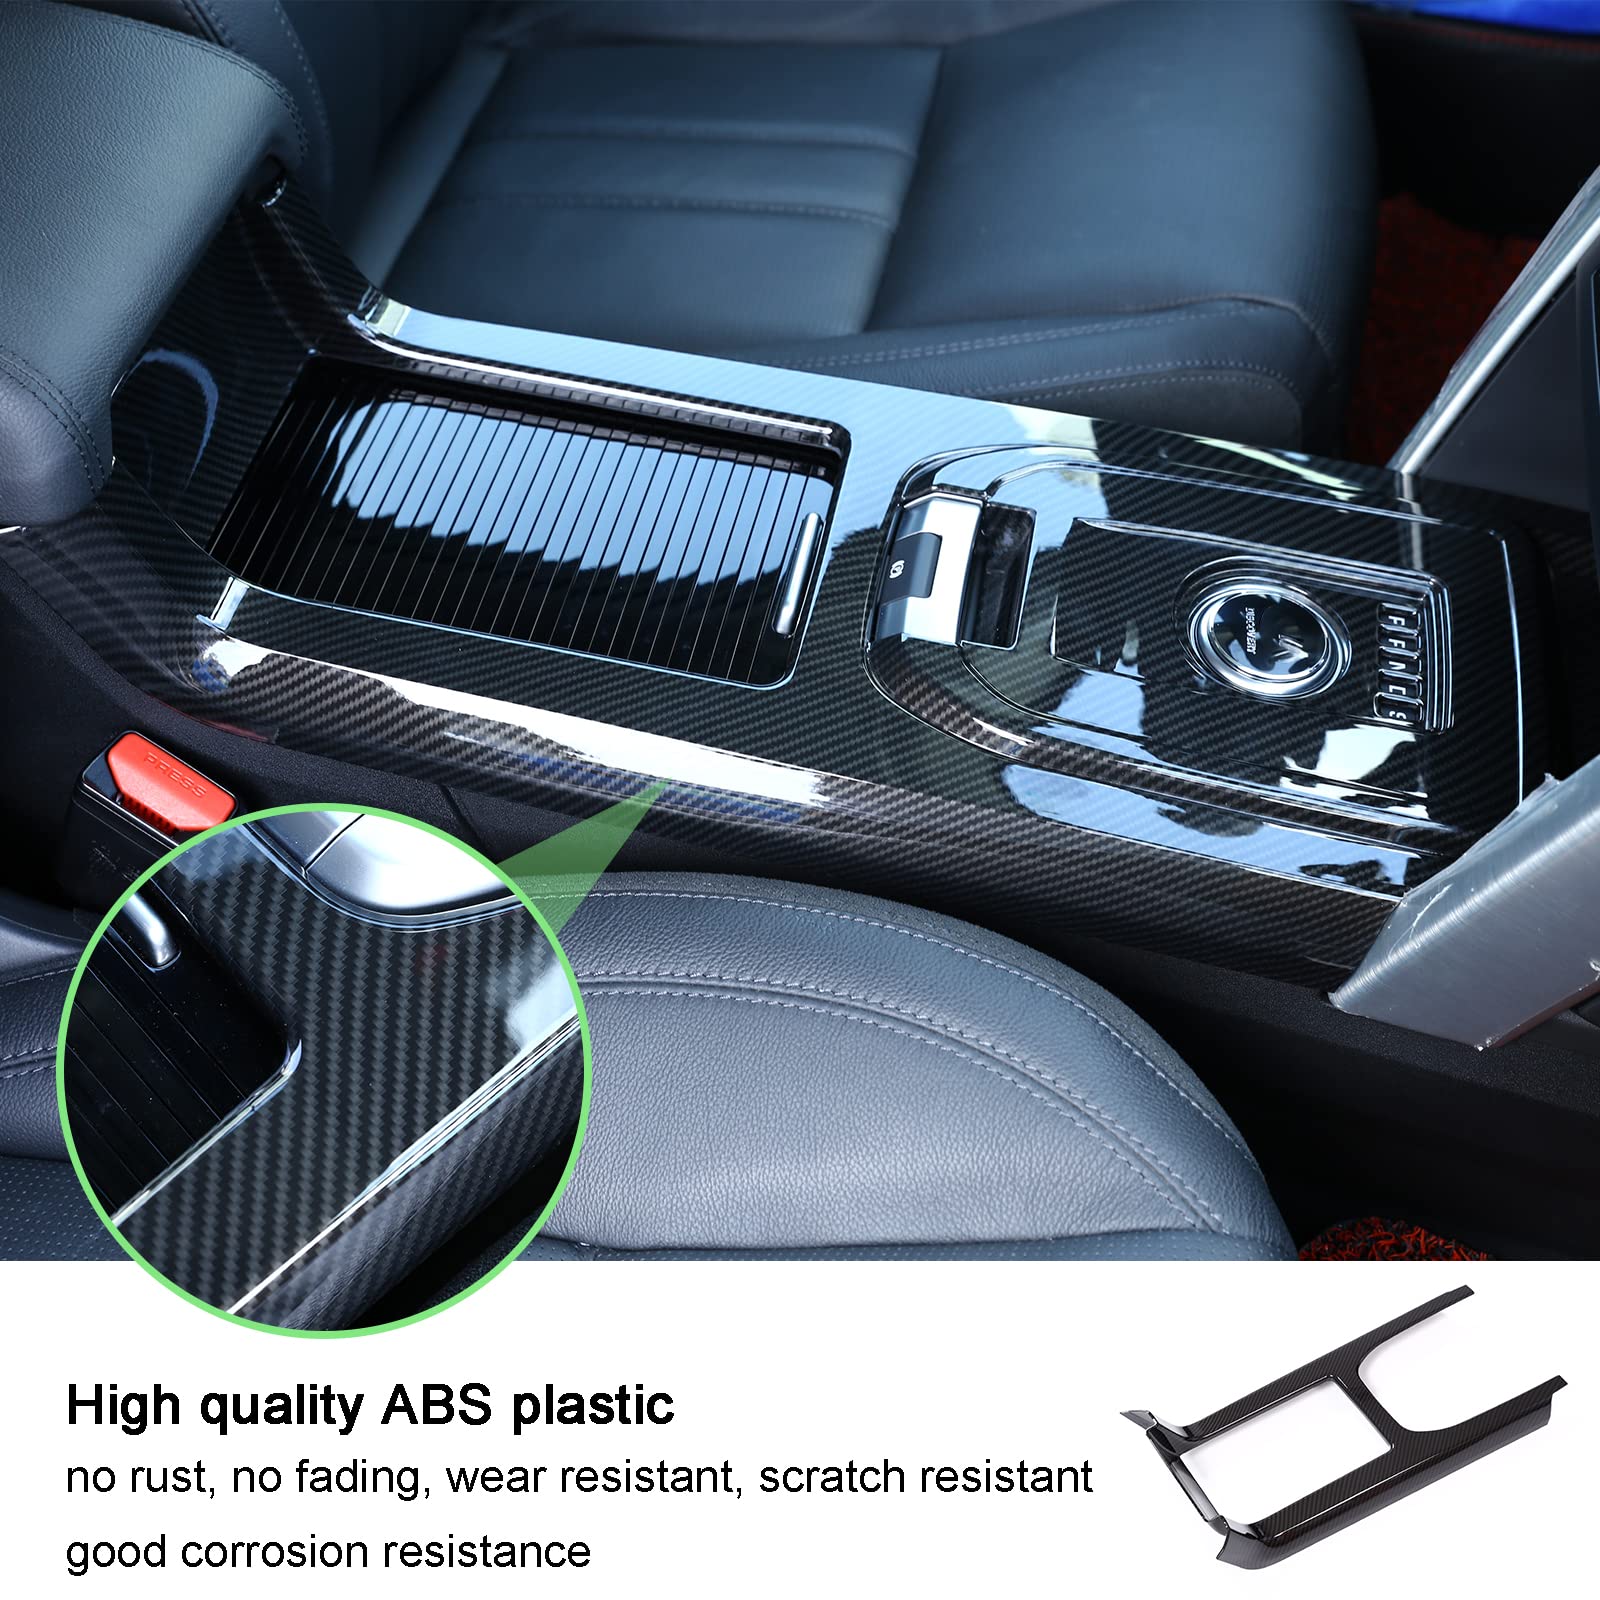 LLKUANG Carbon Fiber Style ABS Inner Center Console Gear Shift Frame Trim for Land Rover Discovery Sport 2015-2019